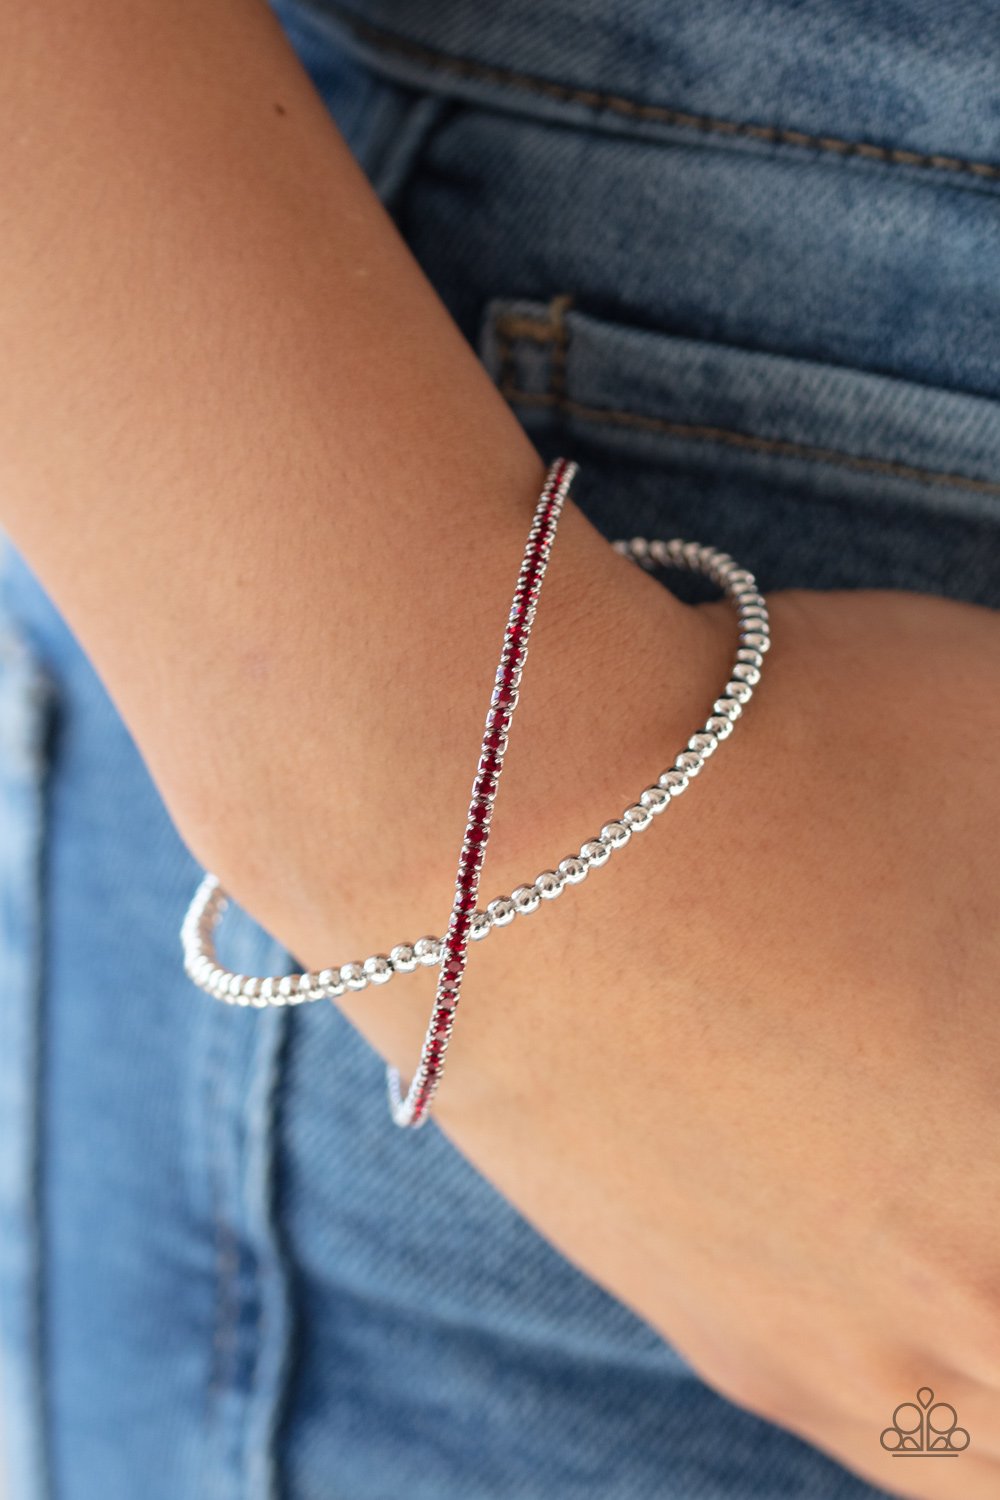 Chicly Crisscrossed-red-Paparazzi bracelet